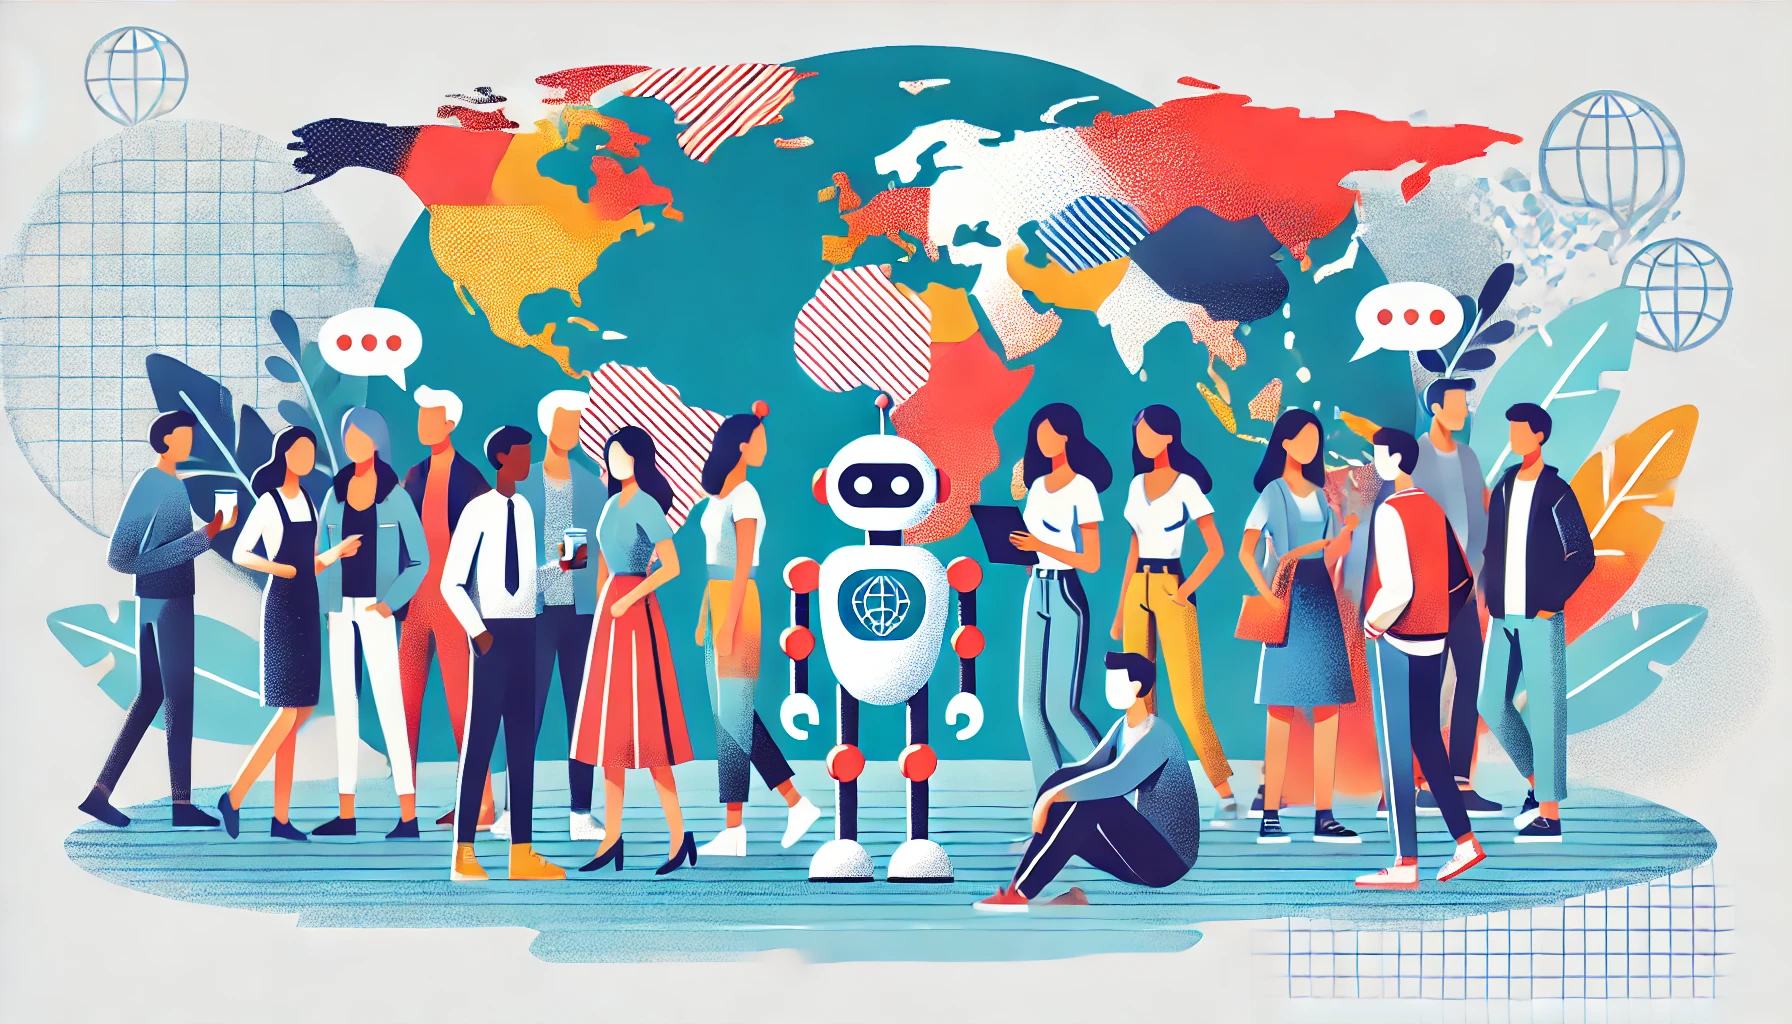 Google Translate uses an AI assist to add over 100 new languages: Plus, Meta’s LLM Compiler brings language models to assembly code